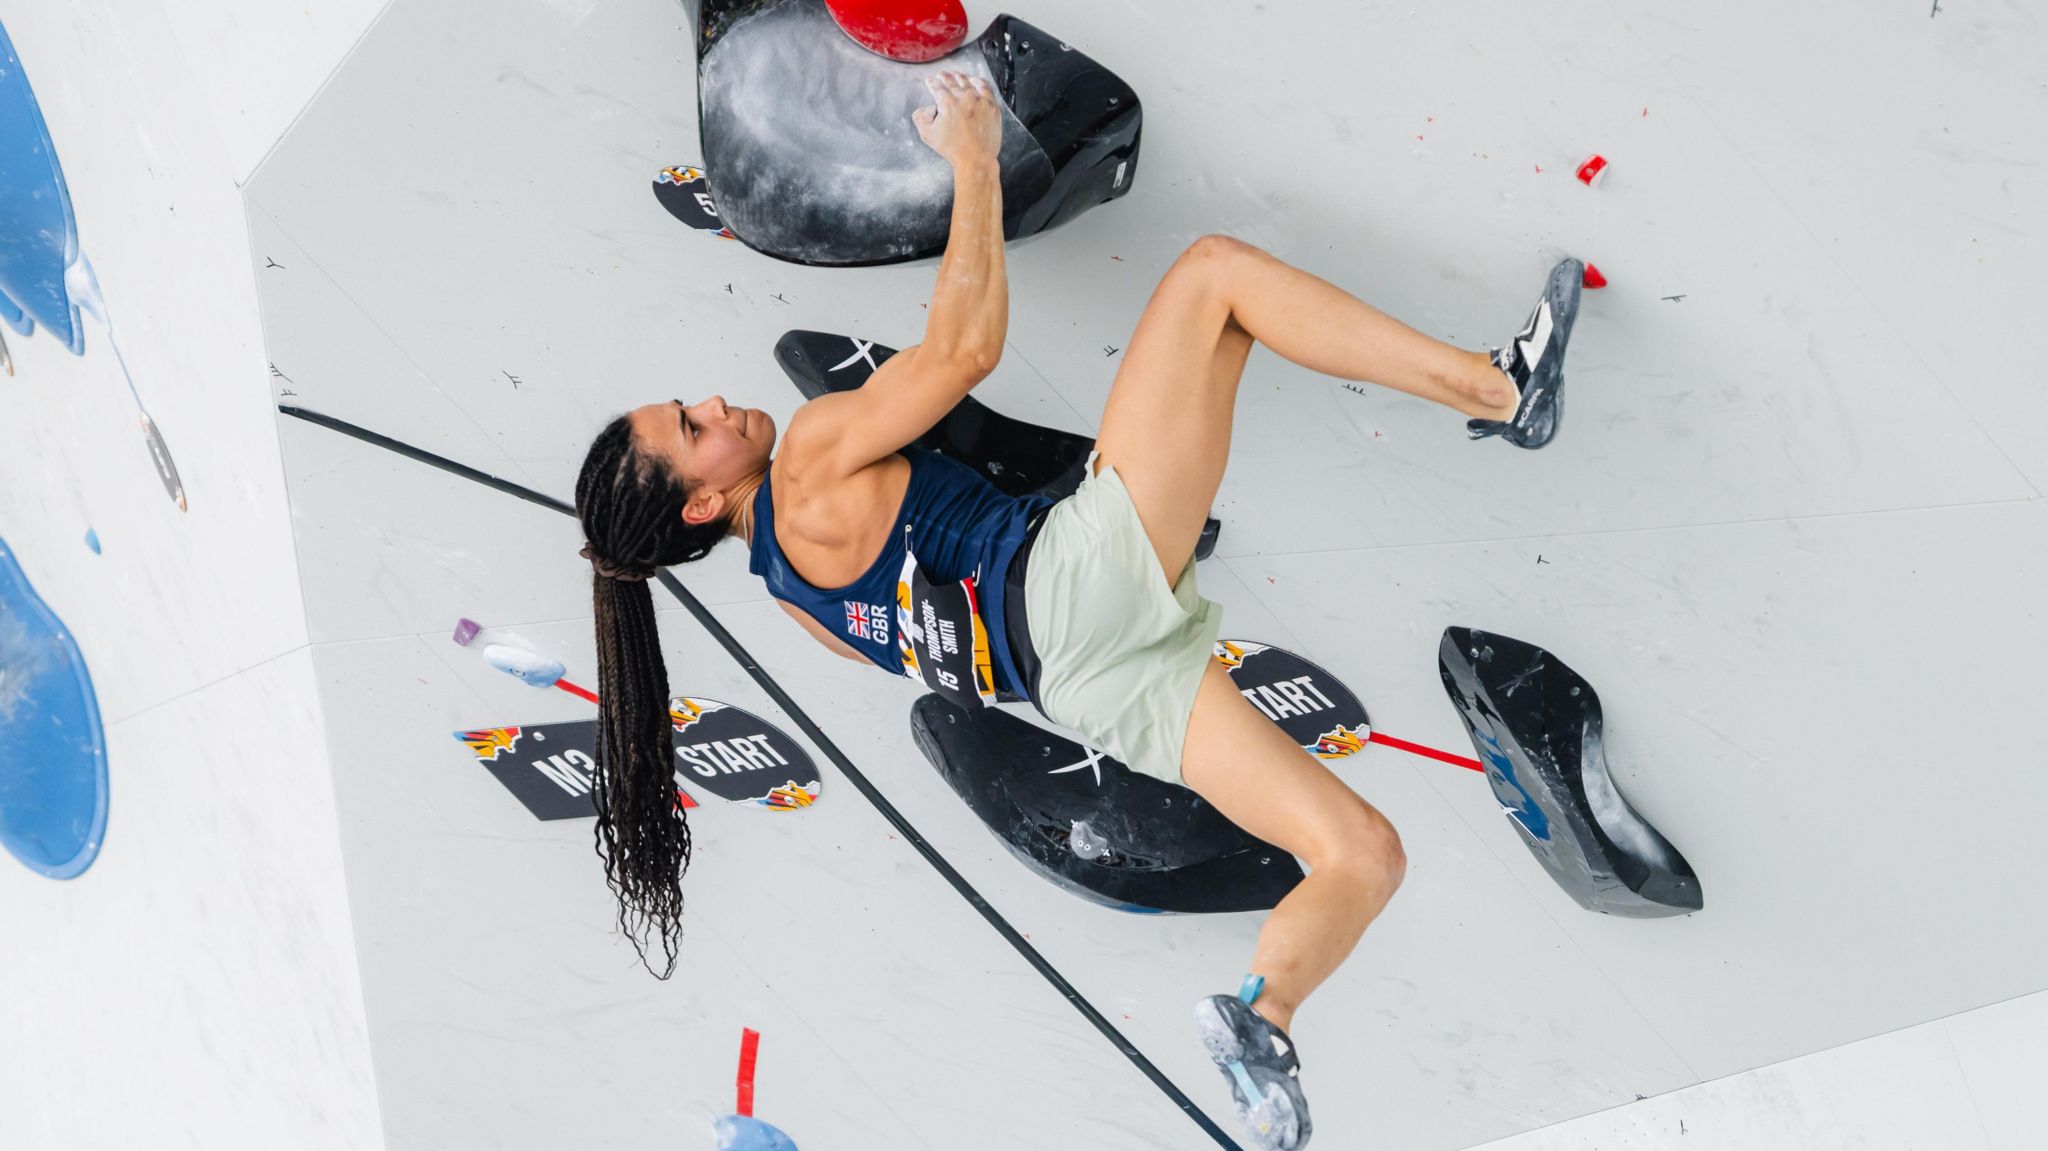 Molly Thompson-Smith climbing. Molly, in a Team GB vest and green shorts, clings to a climbing wall, one leg hanging loose. She has a determined look and her long ponytail hangs down. 